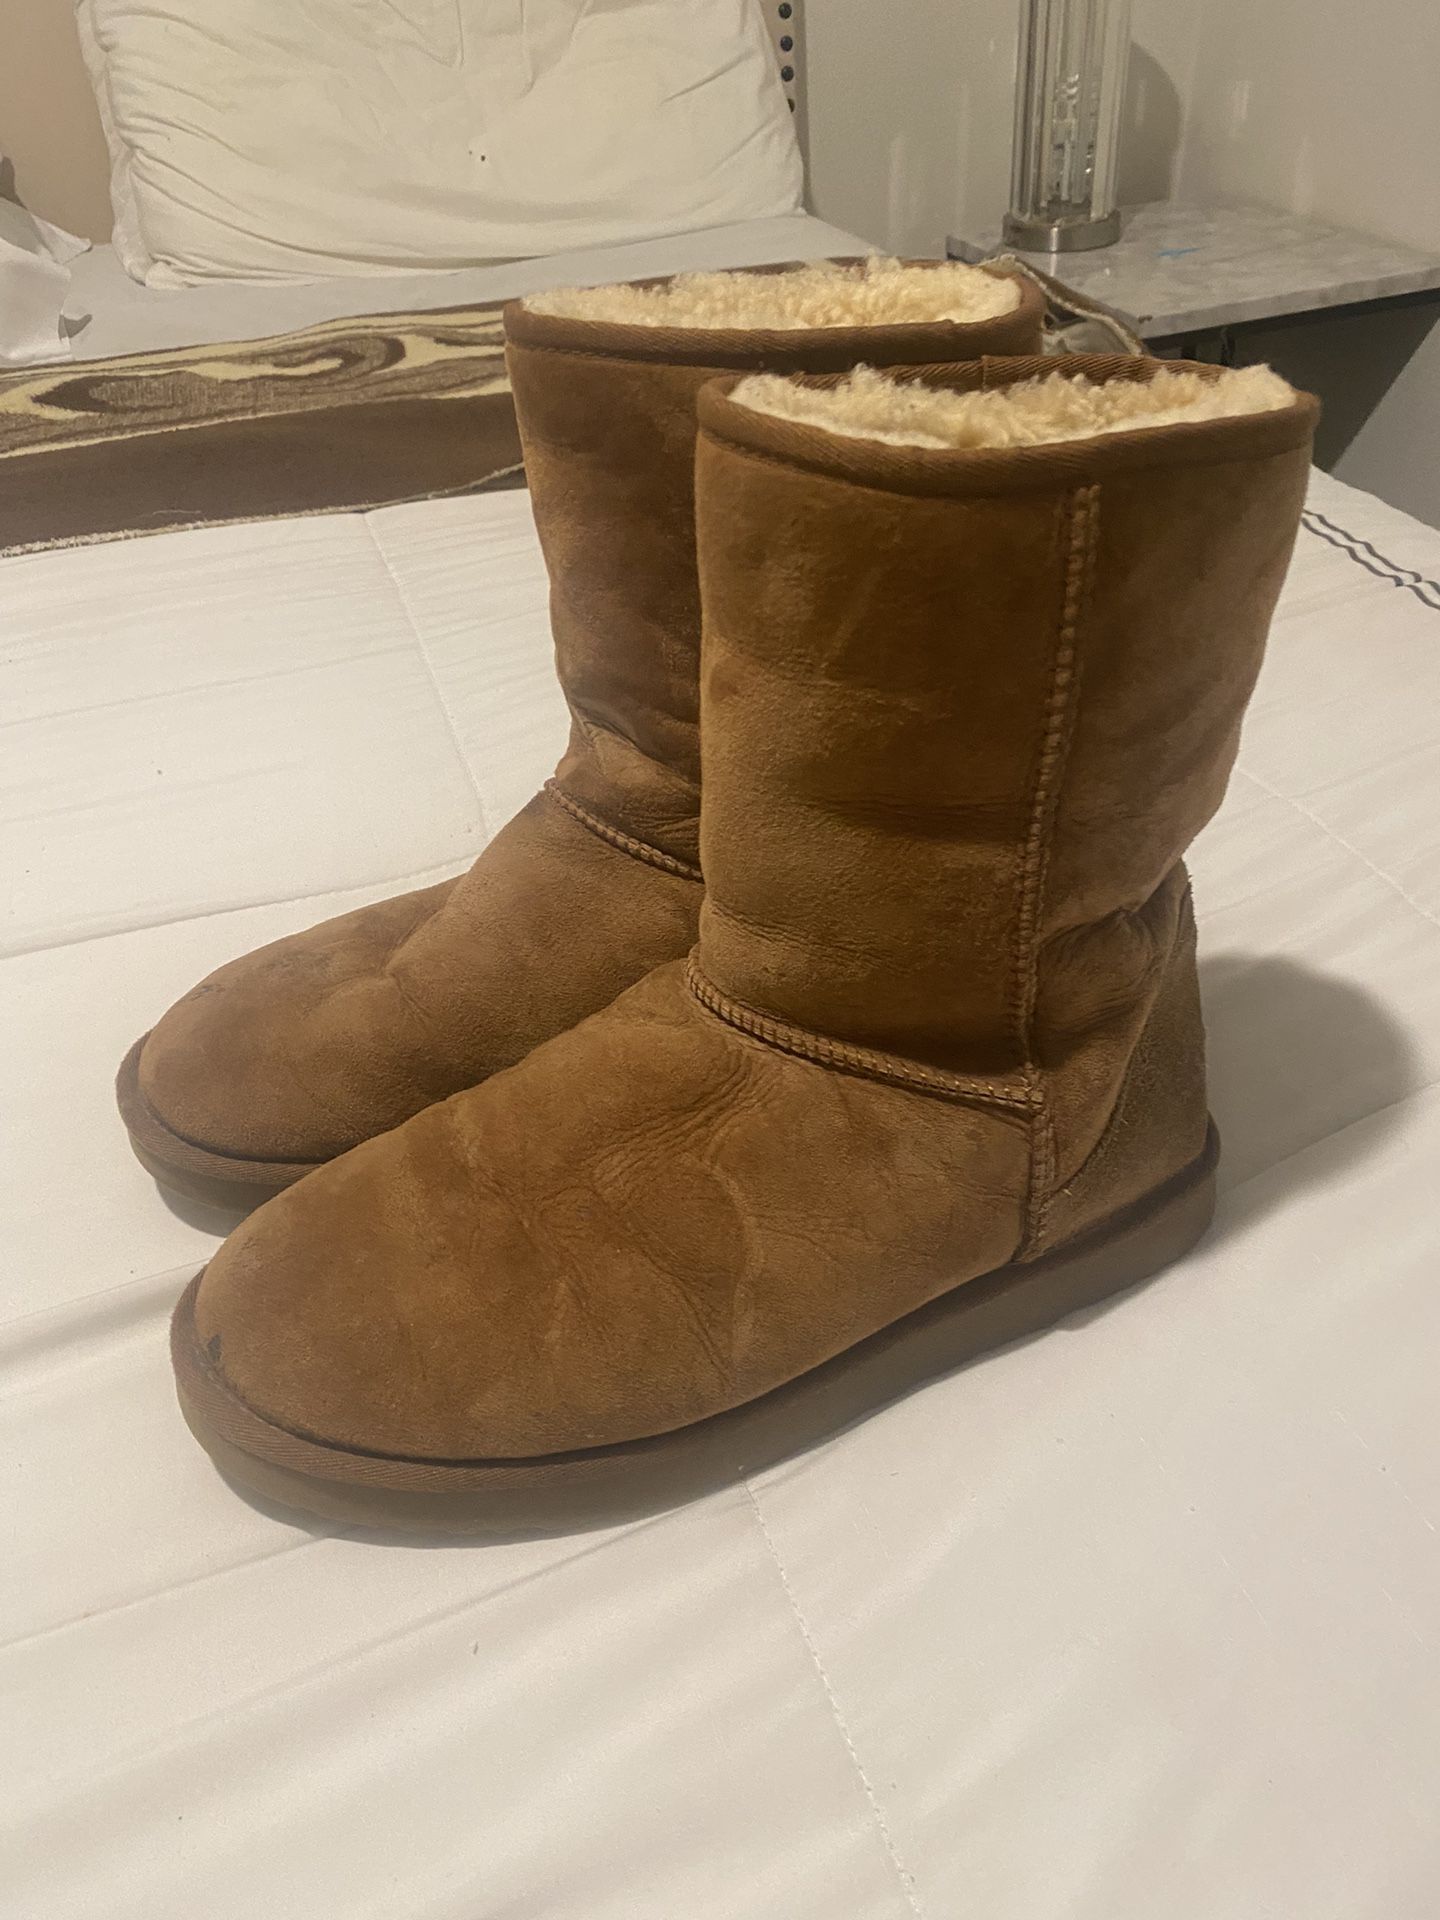 Ugg Boots Size 10